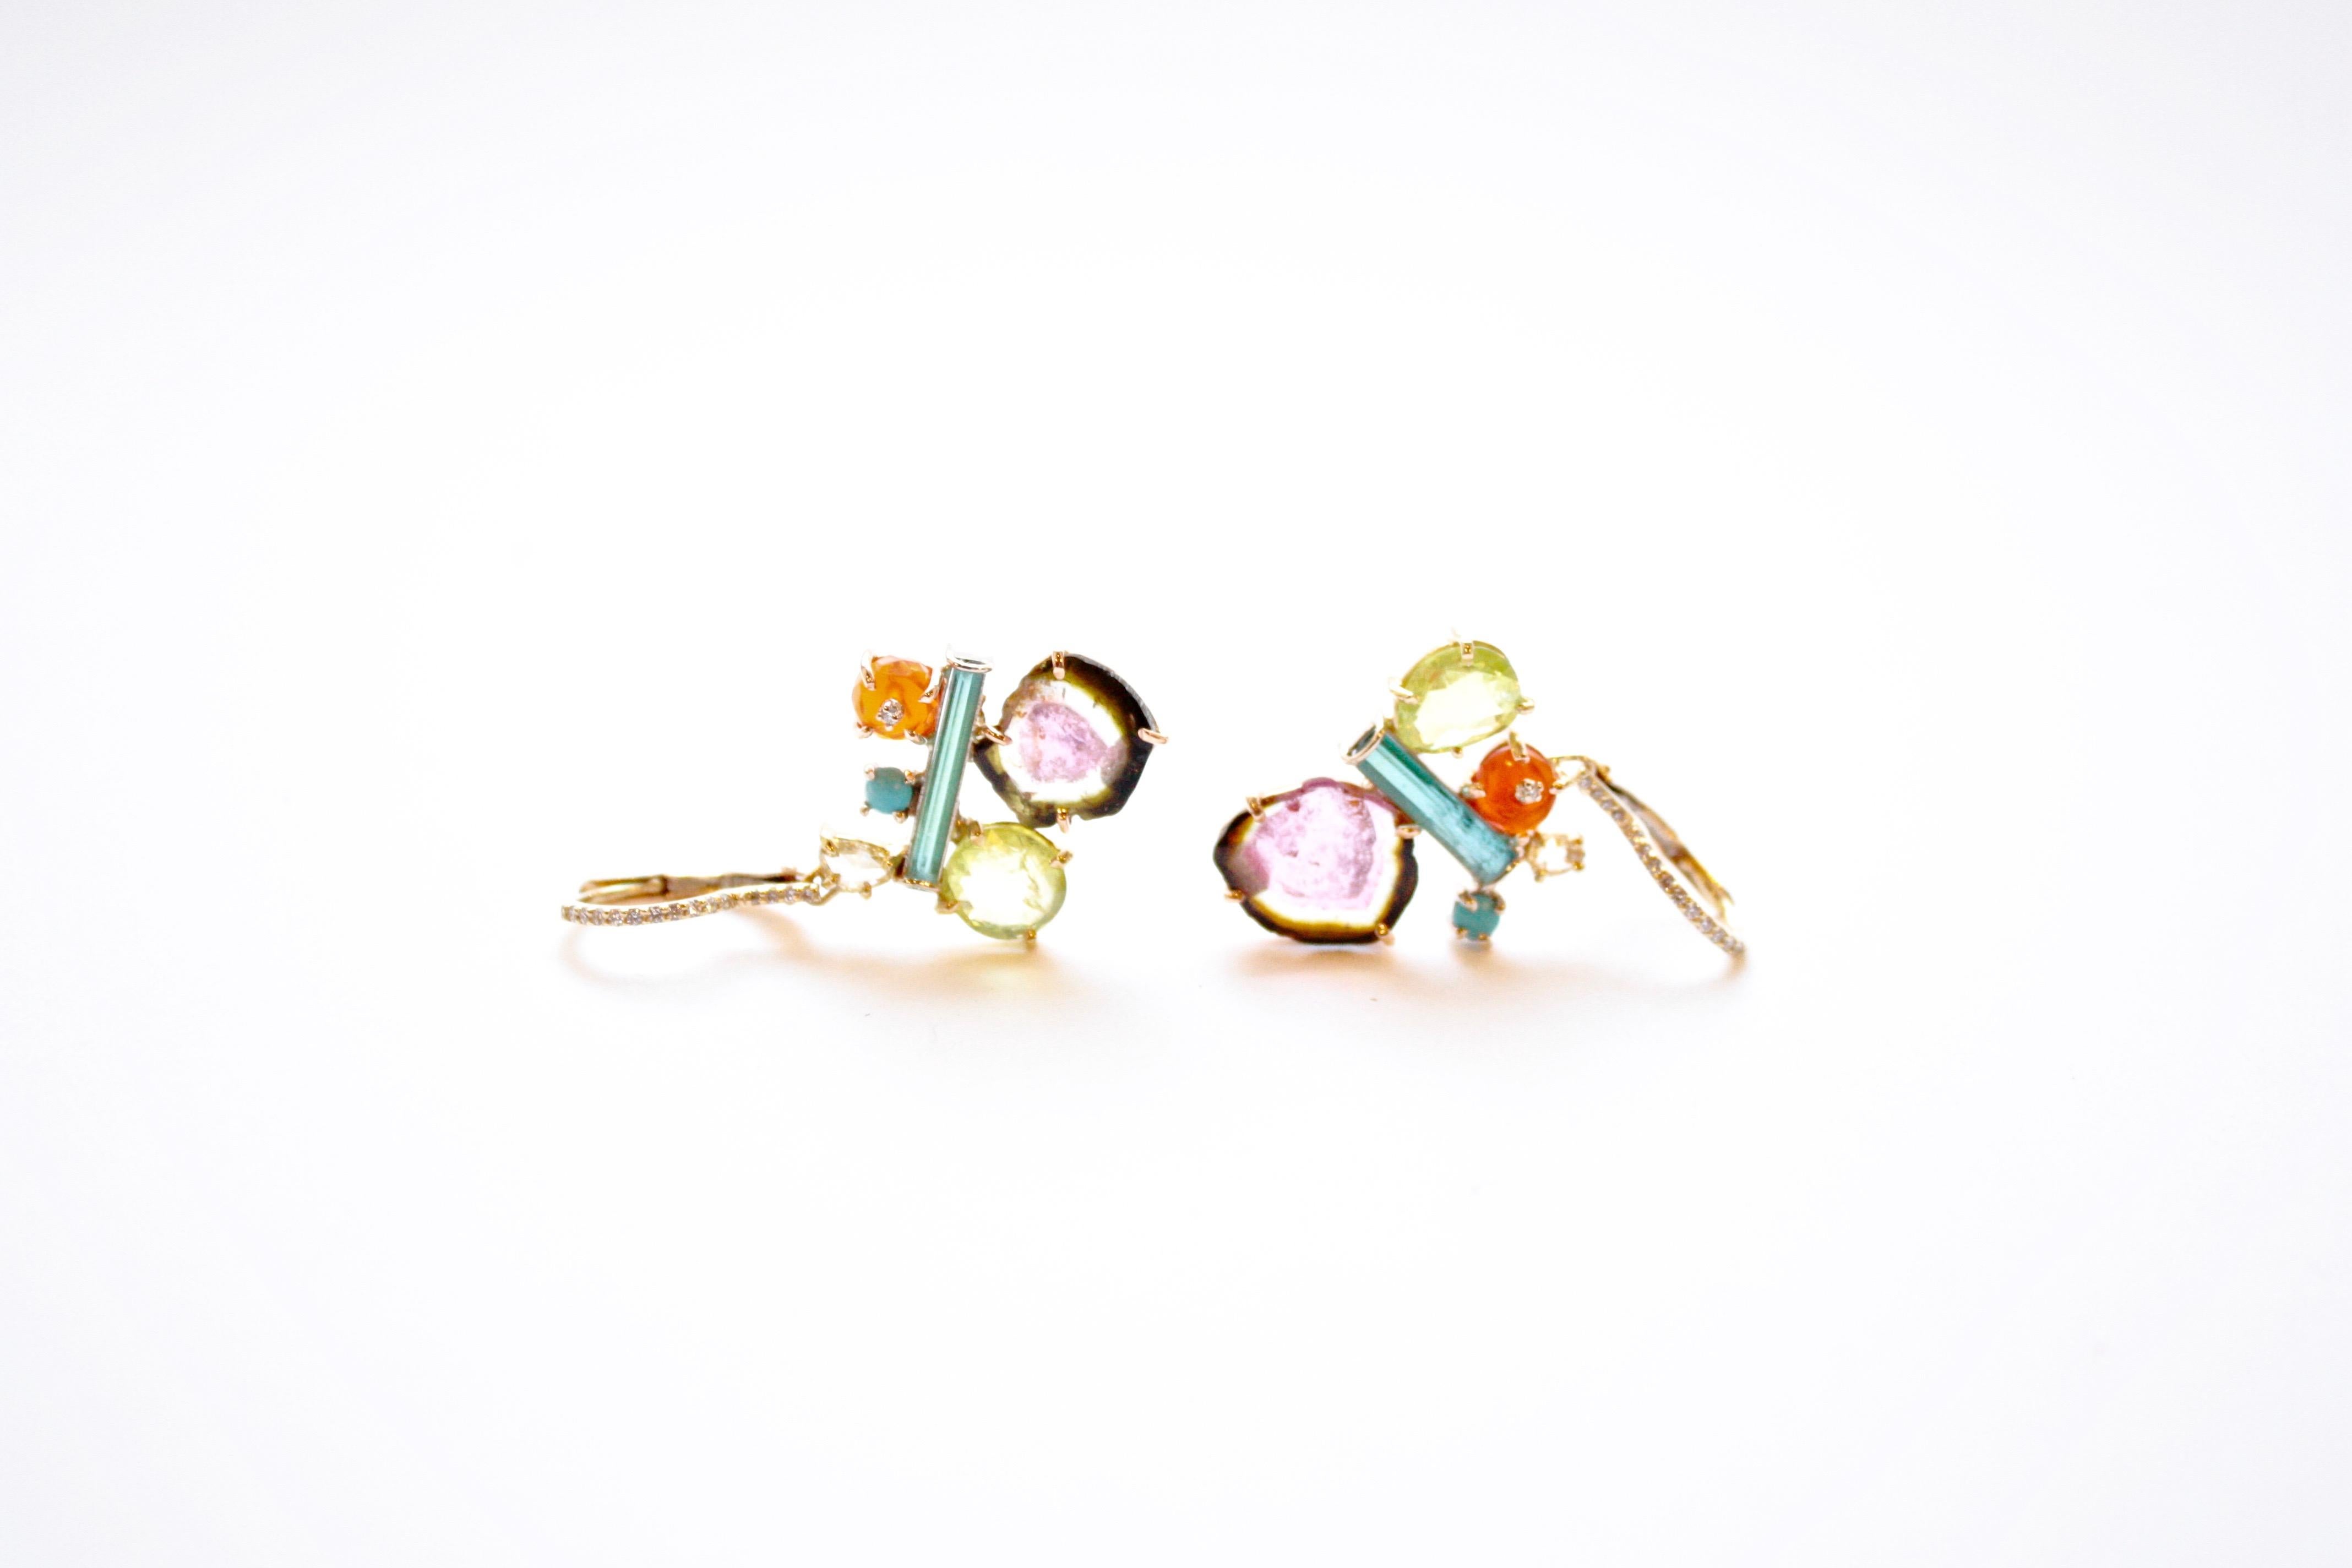 Penny Eardrops
A pair of eighteen-karat yellow gold earrings set with a mélange of different colours and cuts of stones, including Mexican fire opal, tourmaline, turquoise, and chrysoberyl,  along with a dash of diamonds. Each cluster hangs off a